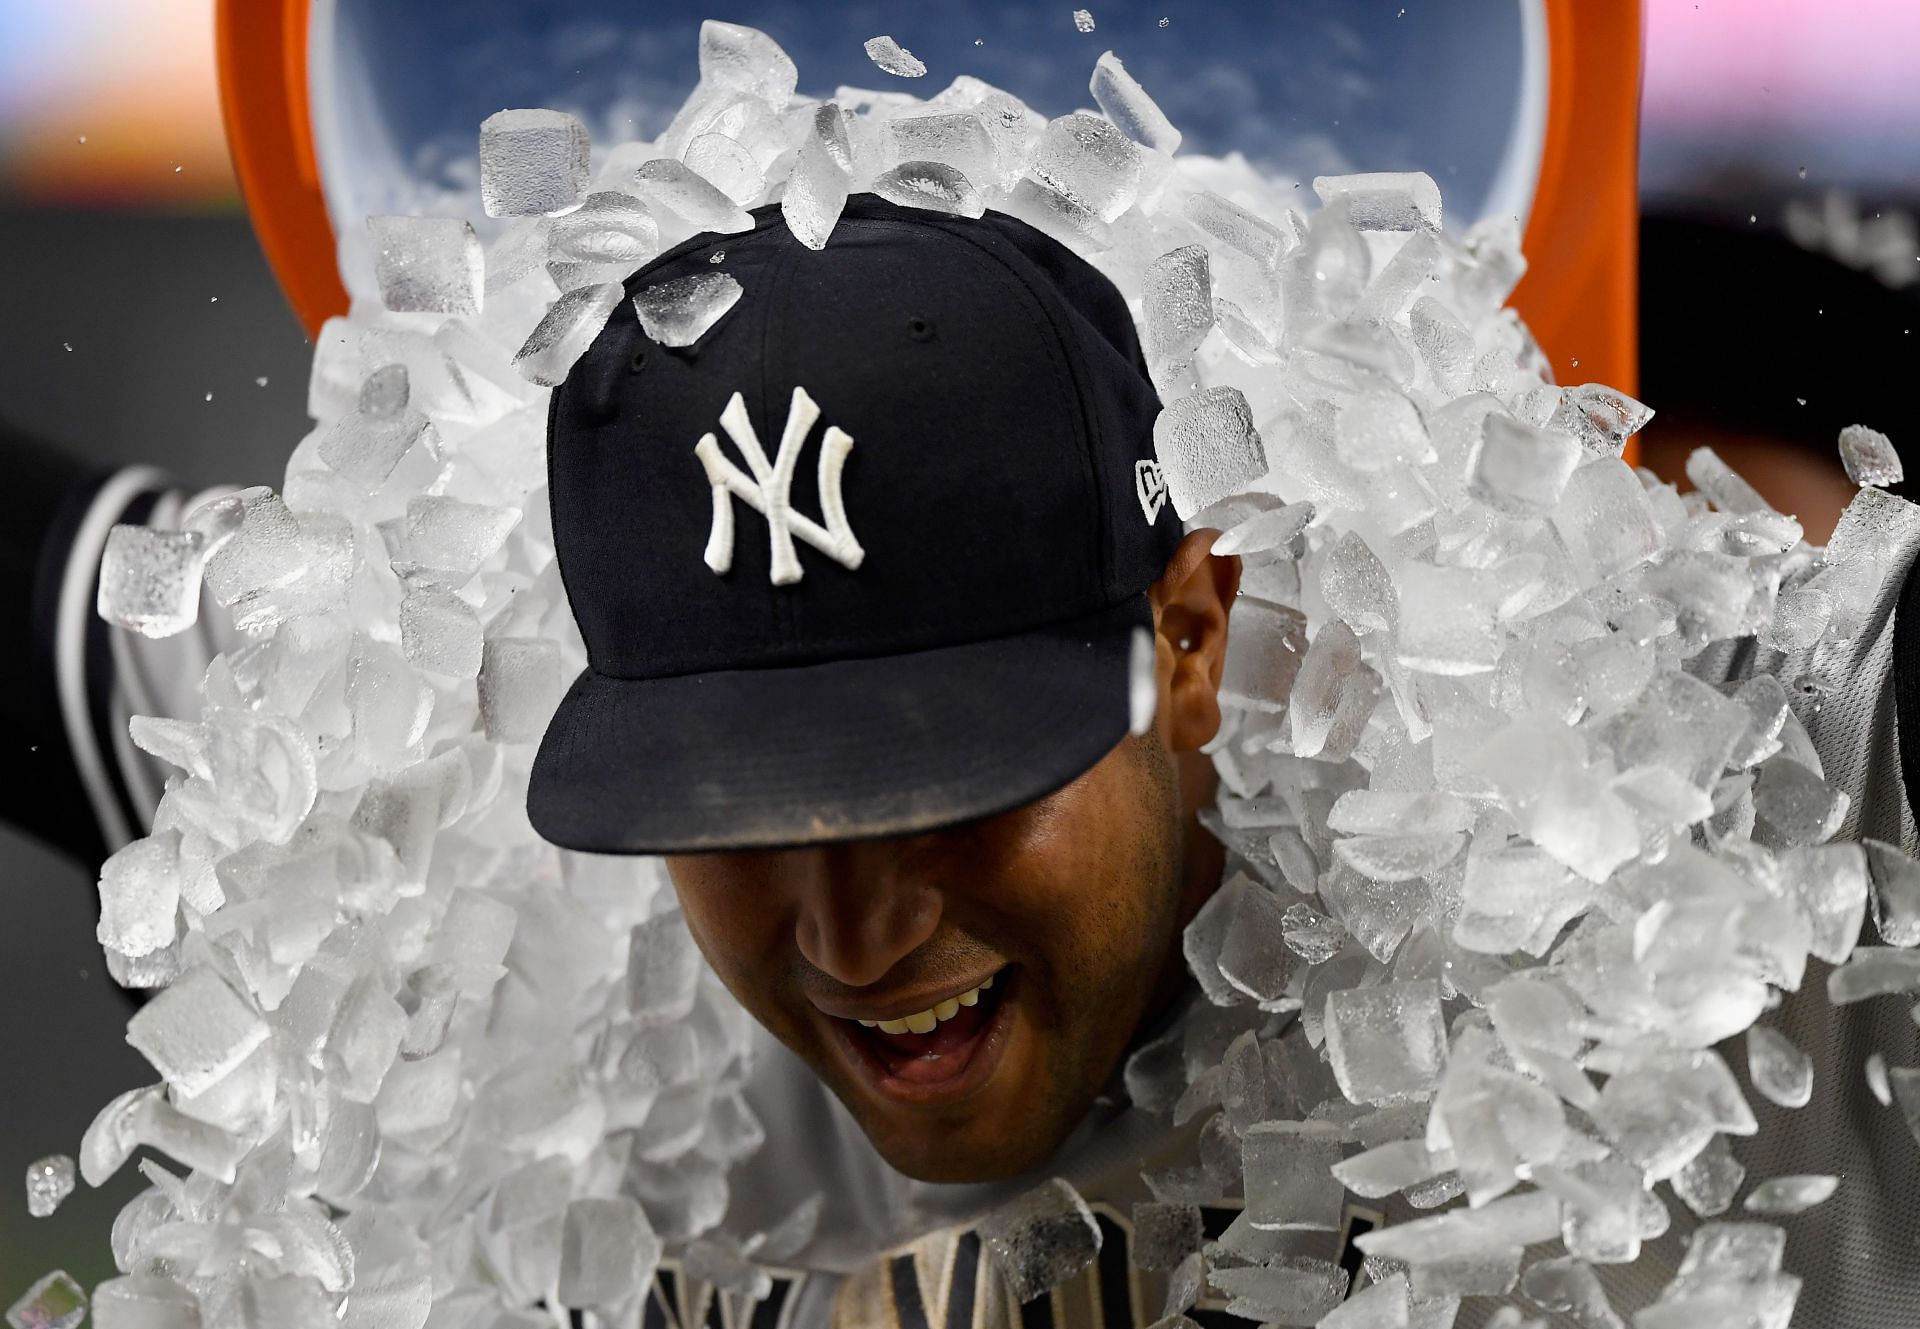 Aaron Hicks of the New York Yankees has ice poured on him.